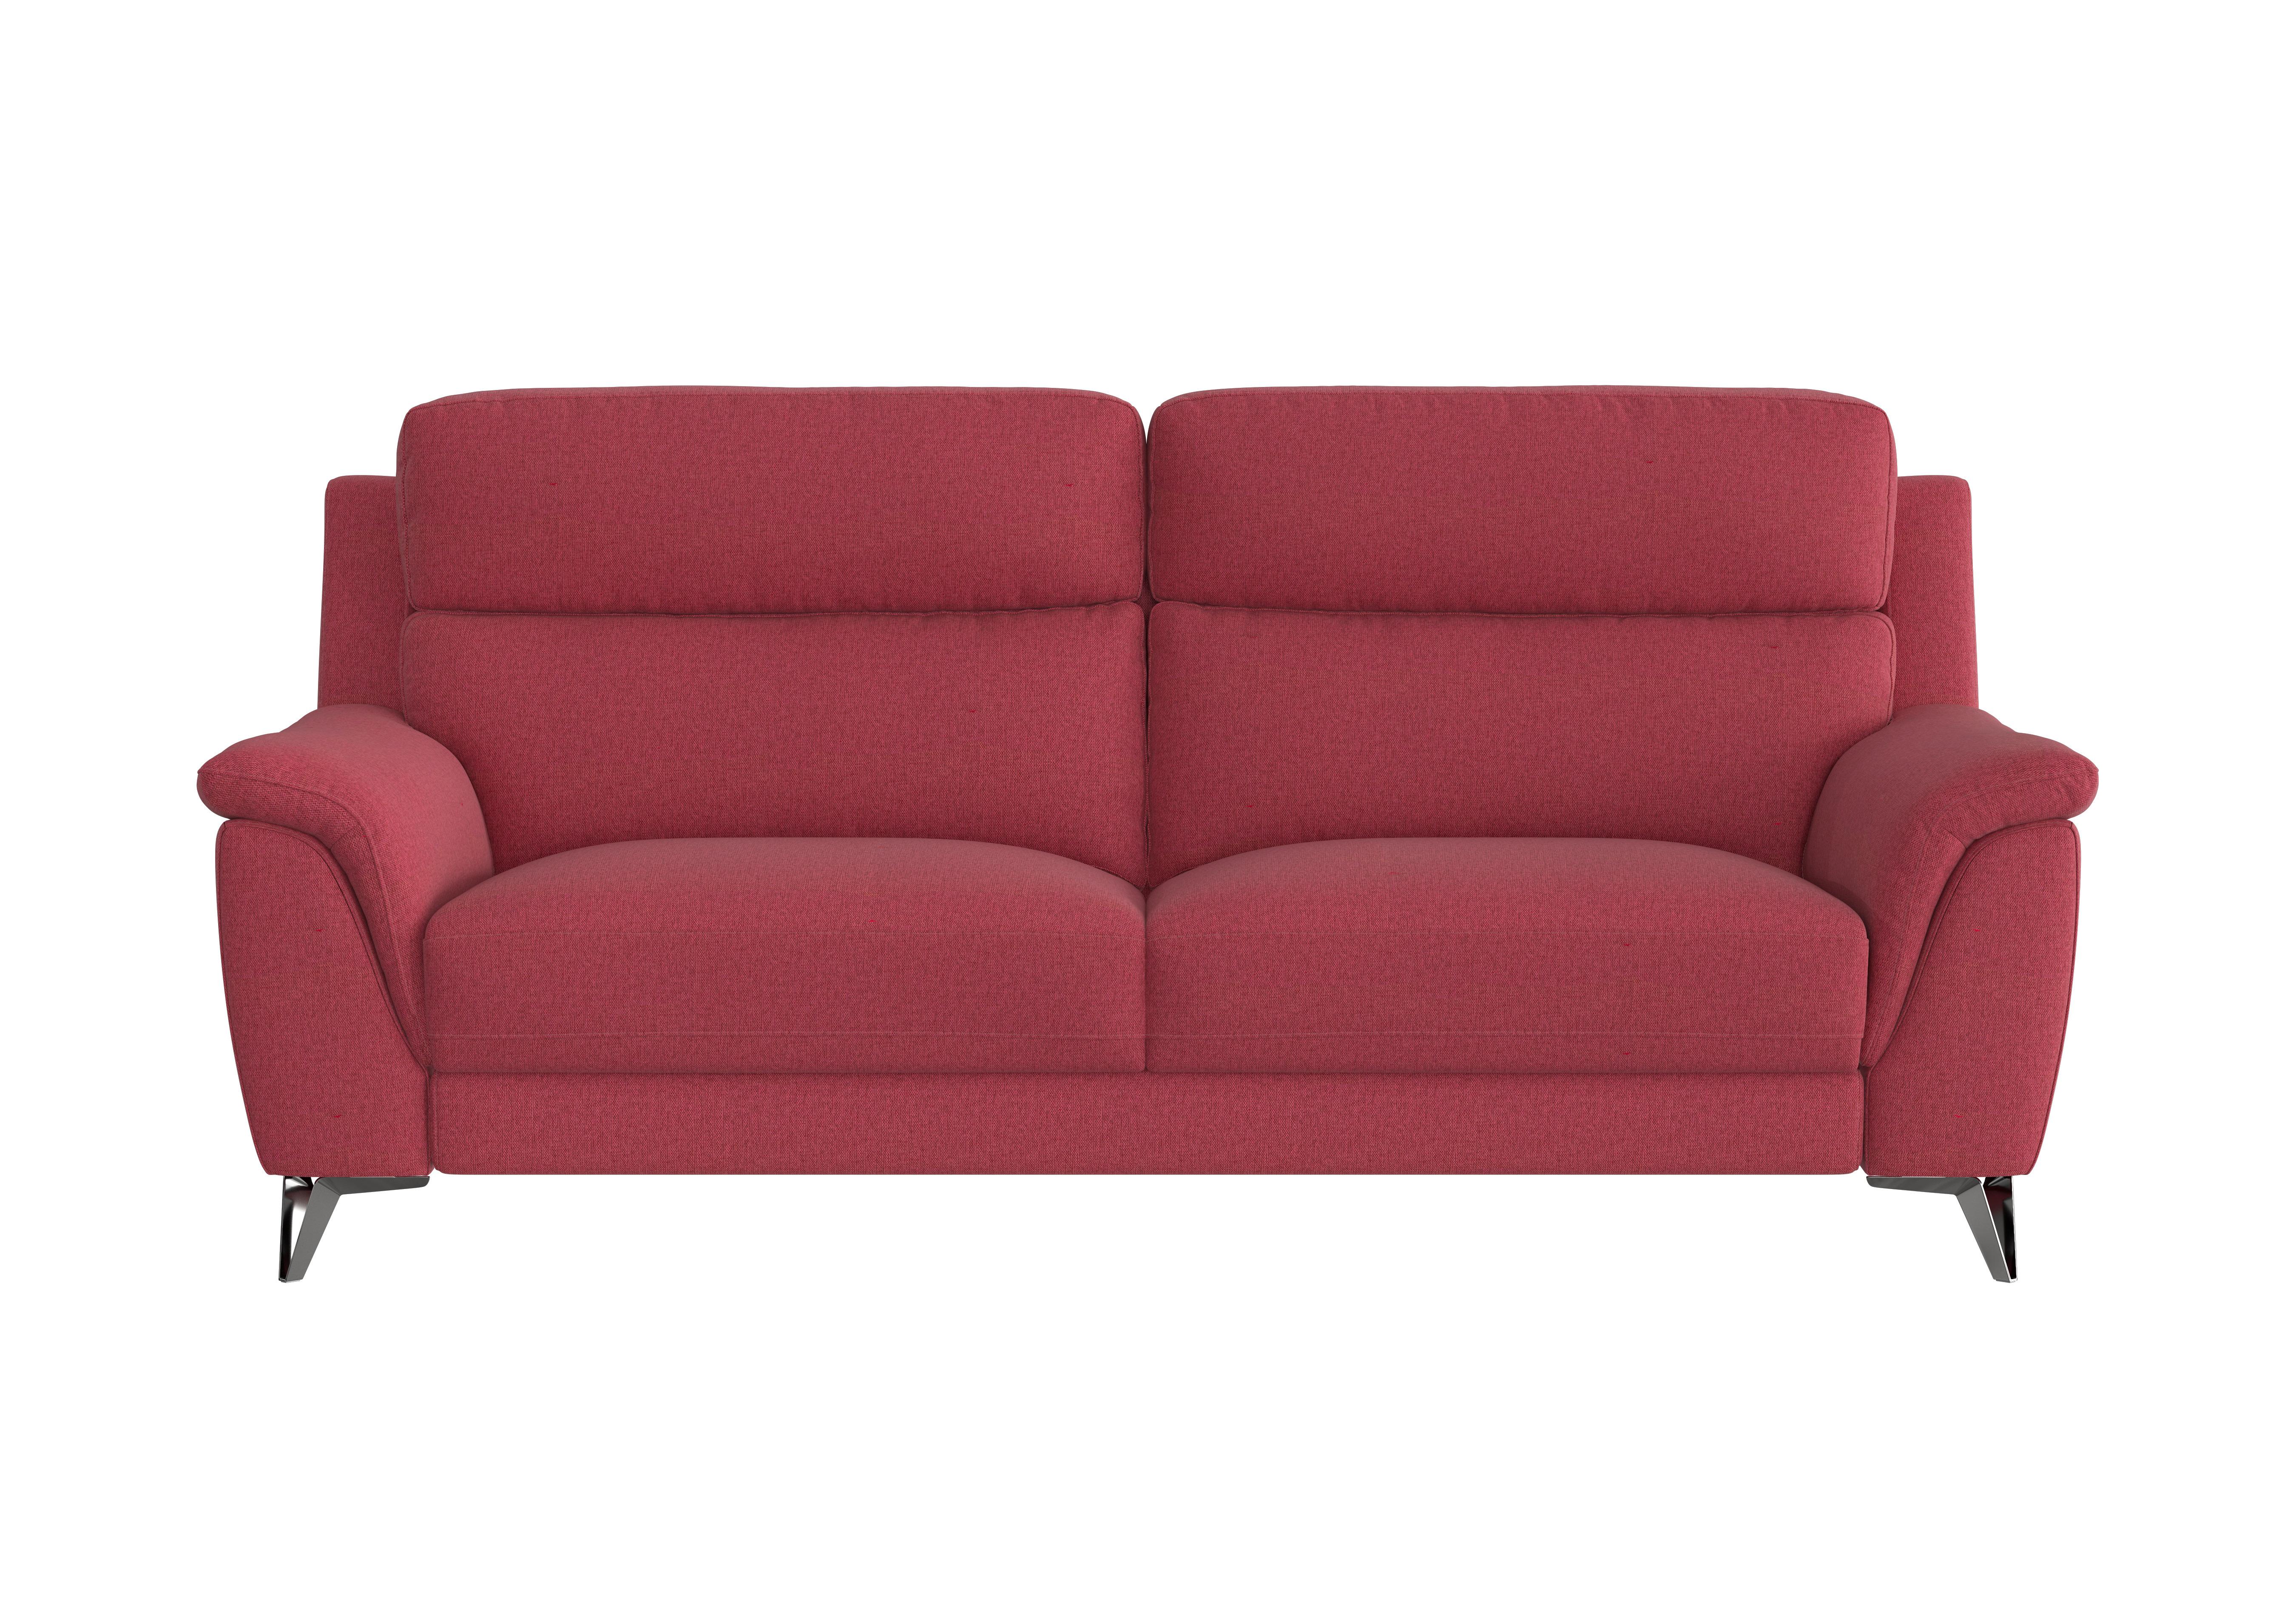 Contempo 3 Seater Fabric Sofa in Fab-Blt-R29 Red on Furniture Village